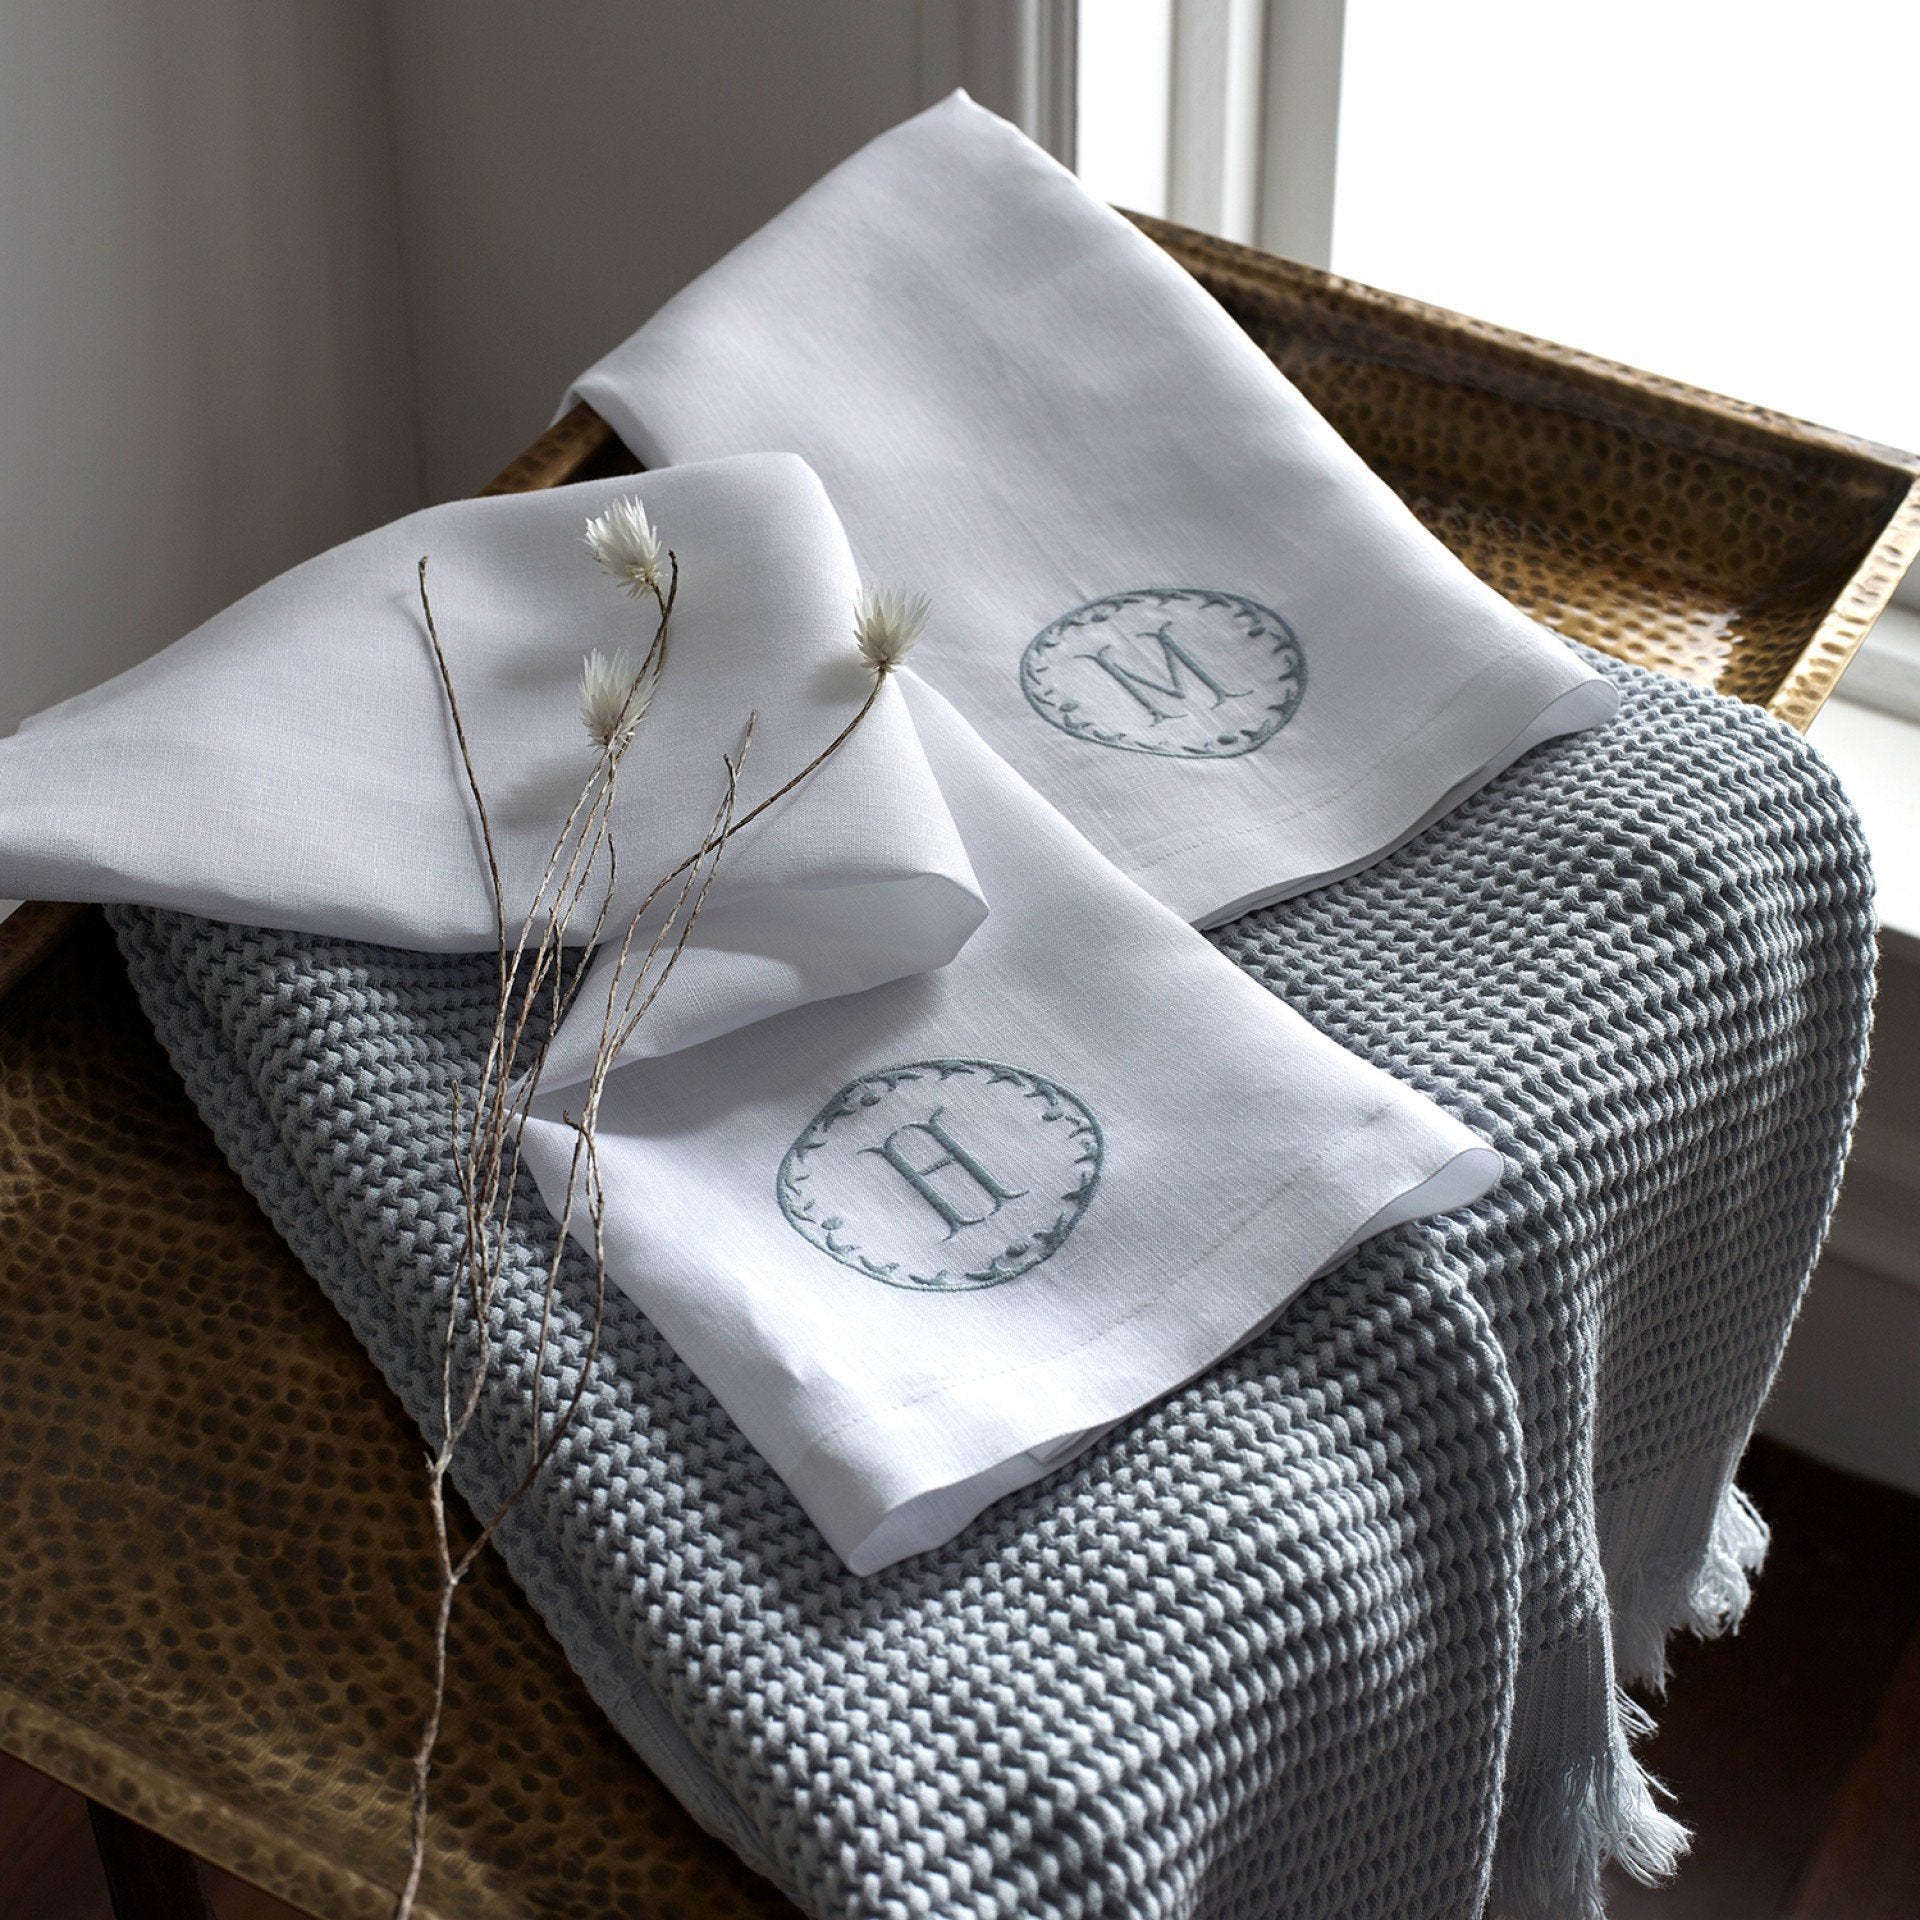 Fig Linens and Home - Matouk Monogrammed Linen Guest Towels 